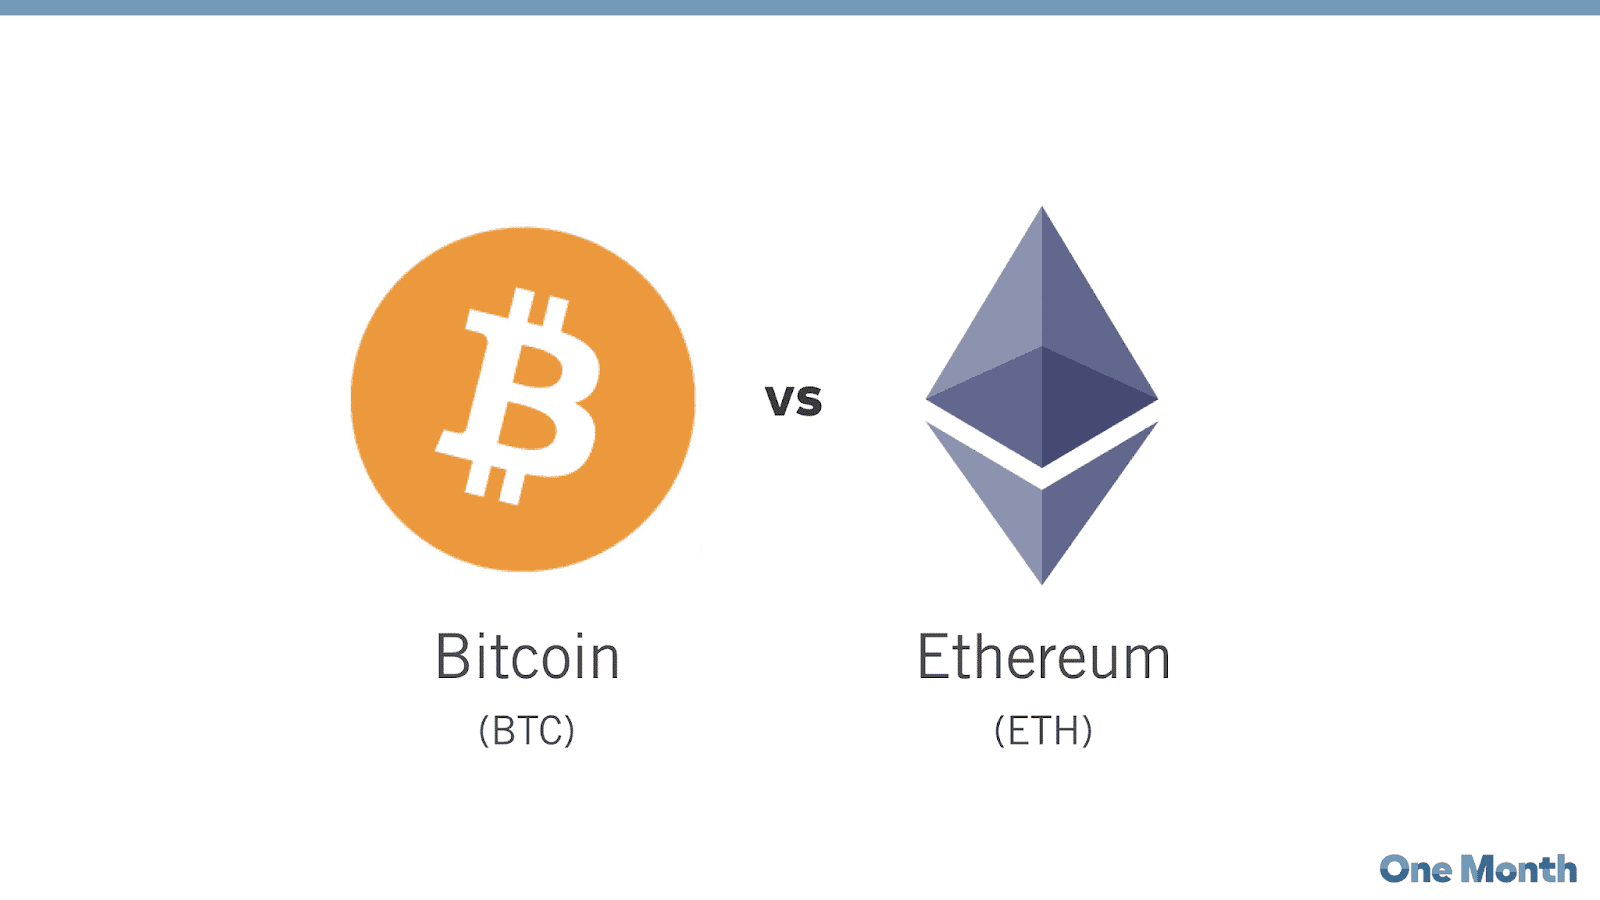 Cryptocurrency (Bitcoin) operates on its own blockchain network, while Ethereum (Token) offers greater flexibility - Image source: One Month